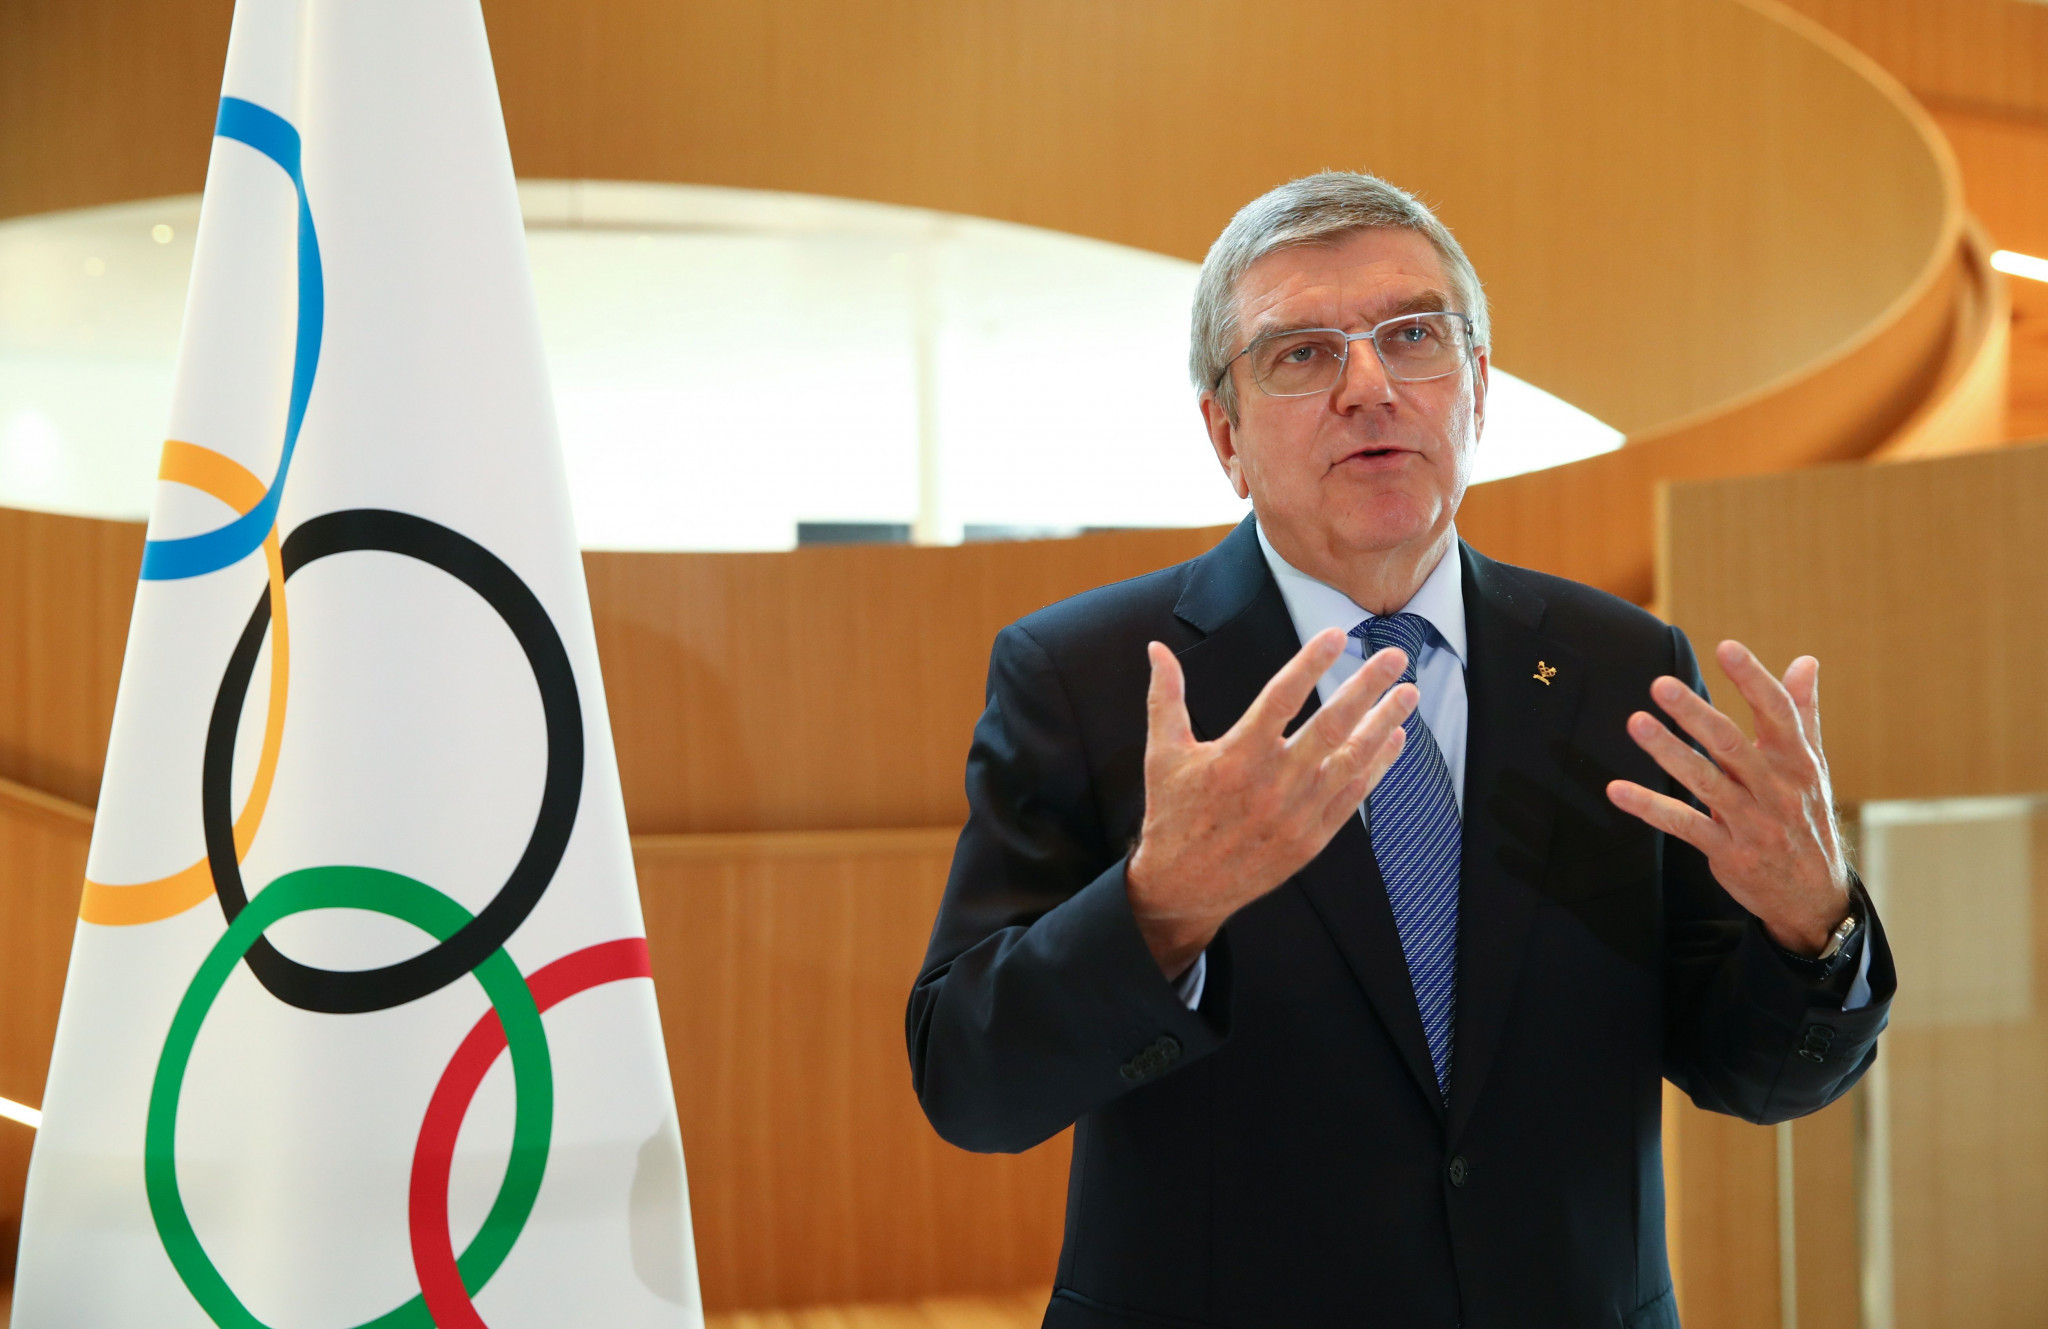 IOC President Thomas Bach described the Olympic Games as the most complex event in the world ©Getty Images